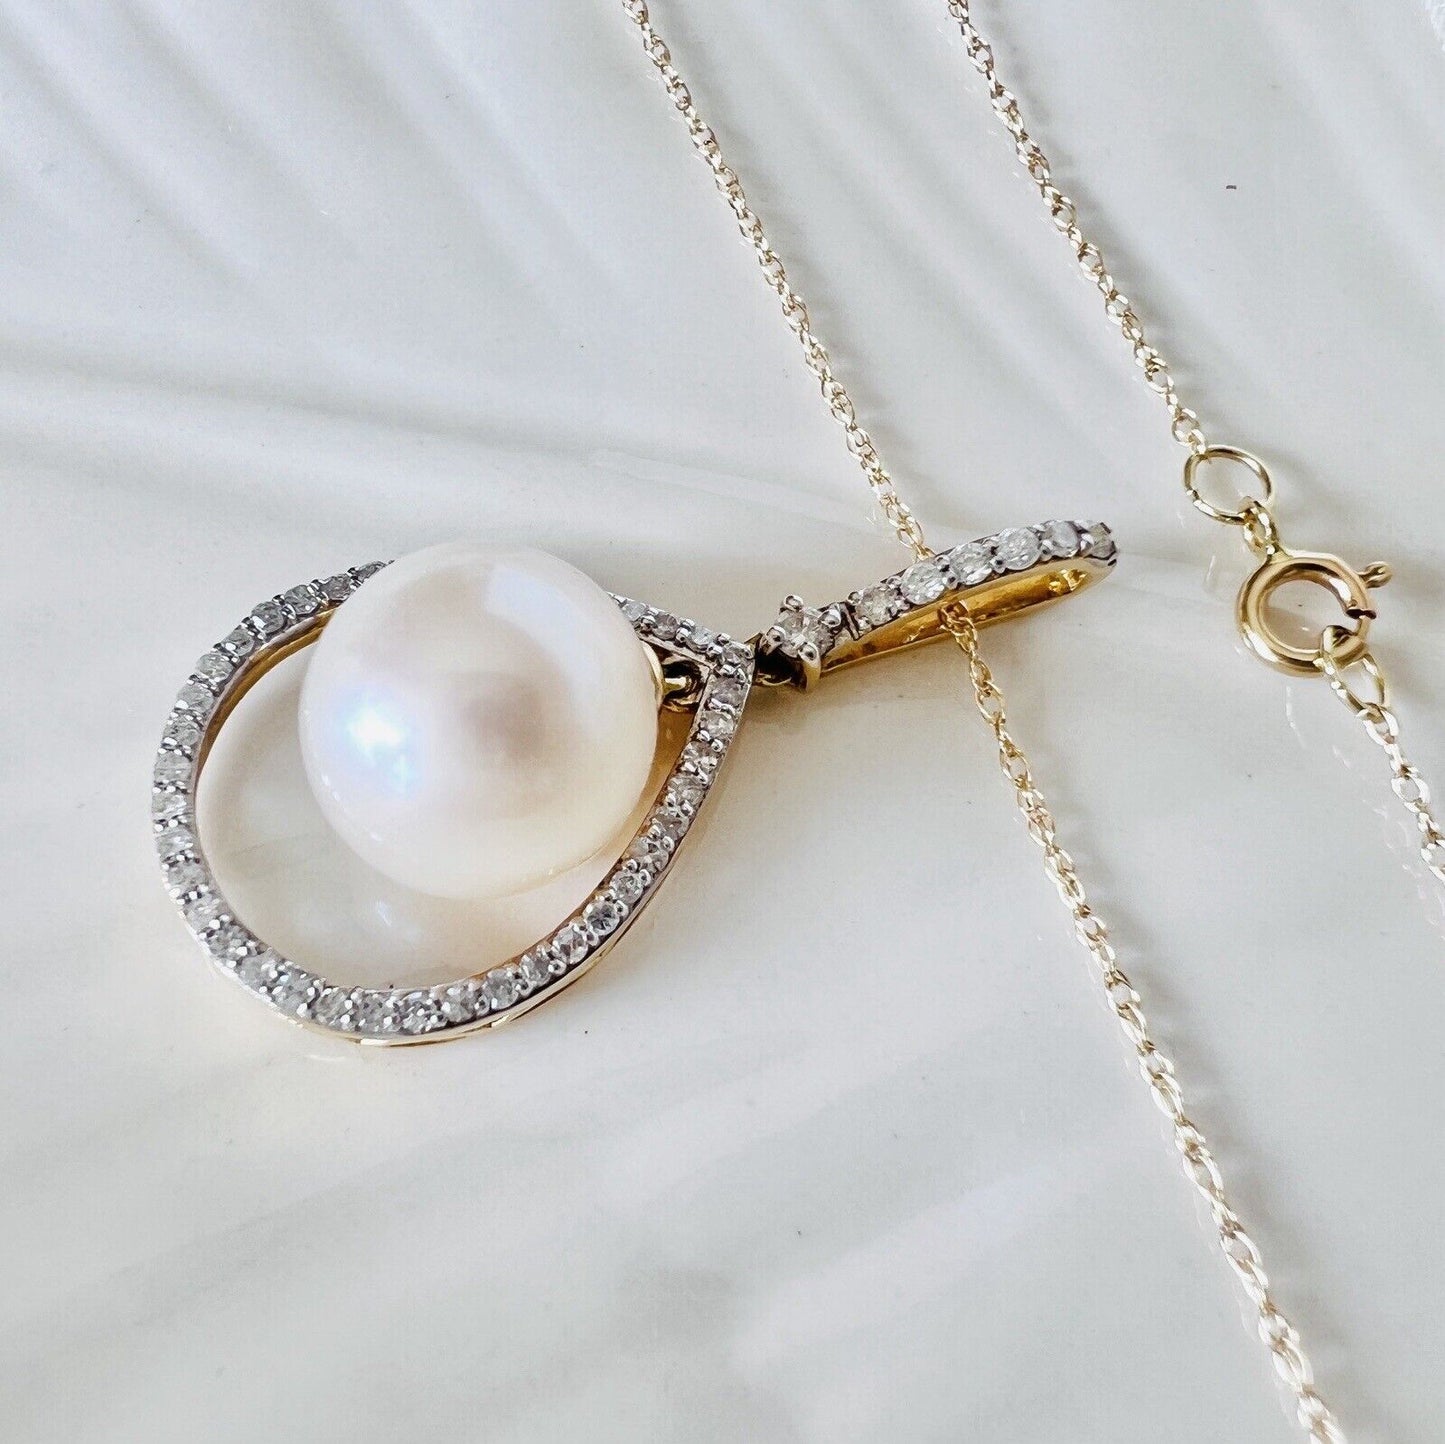 Solid 14k Yellow Gold Genuine Pearl and Diamond Drop Pendant Necklace, New 18”